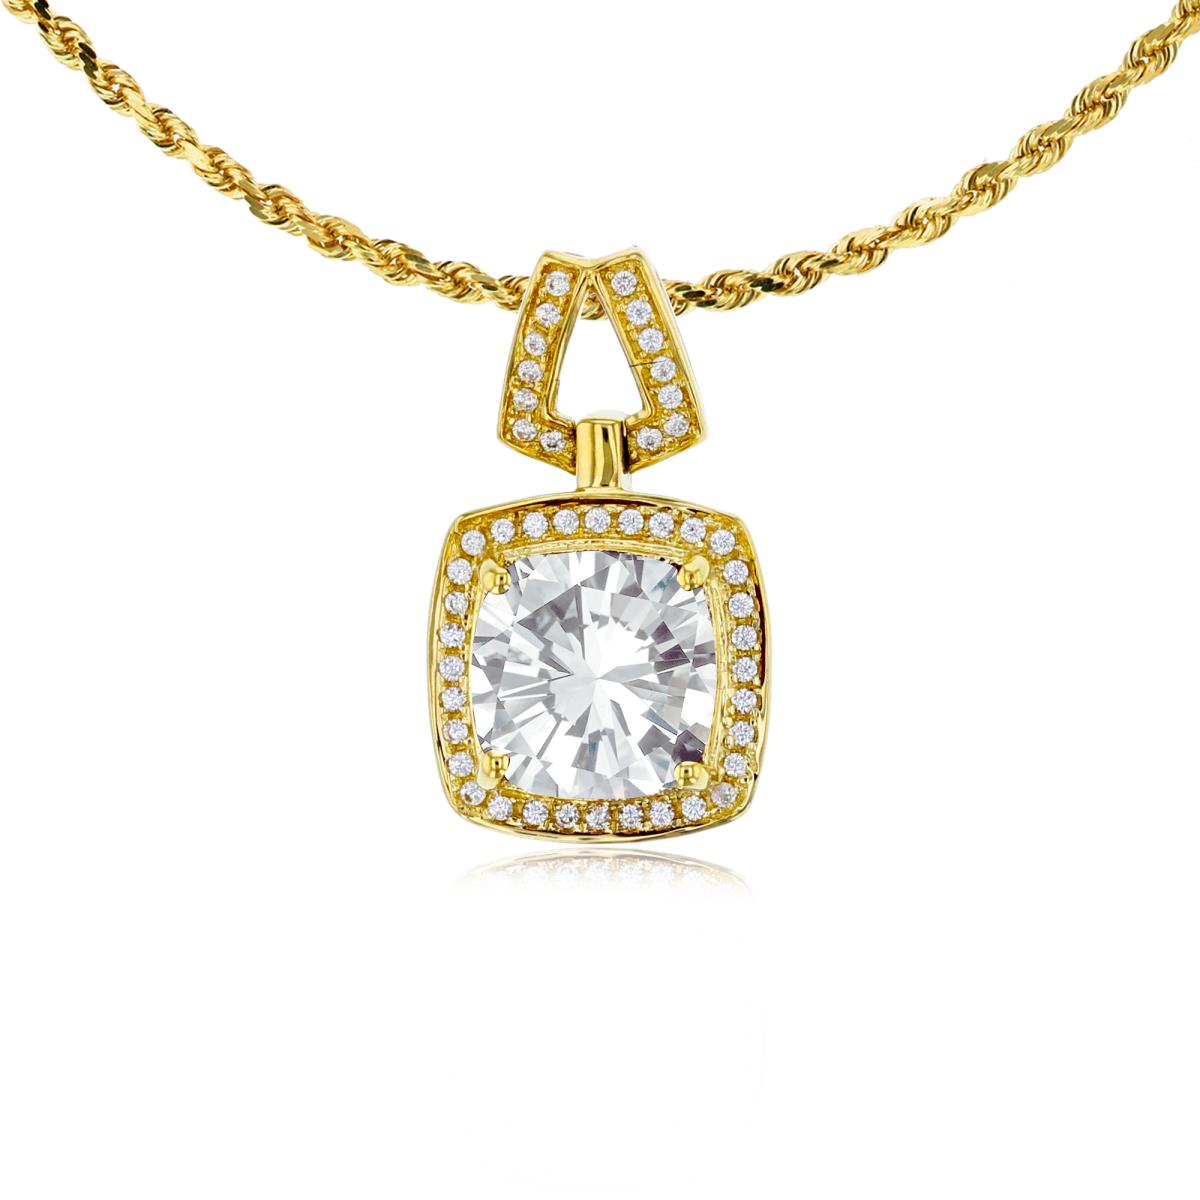 14K Yellow Gold 7mm Cushion White Topaz & 0.10 CTTW Diamond Halo 18" Rope Chain Necklace